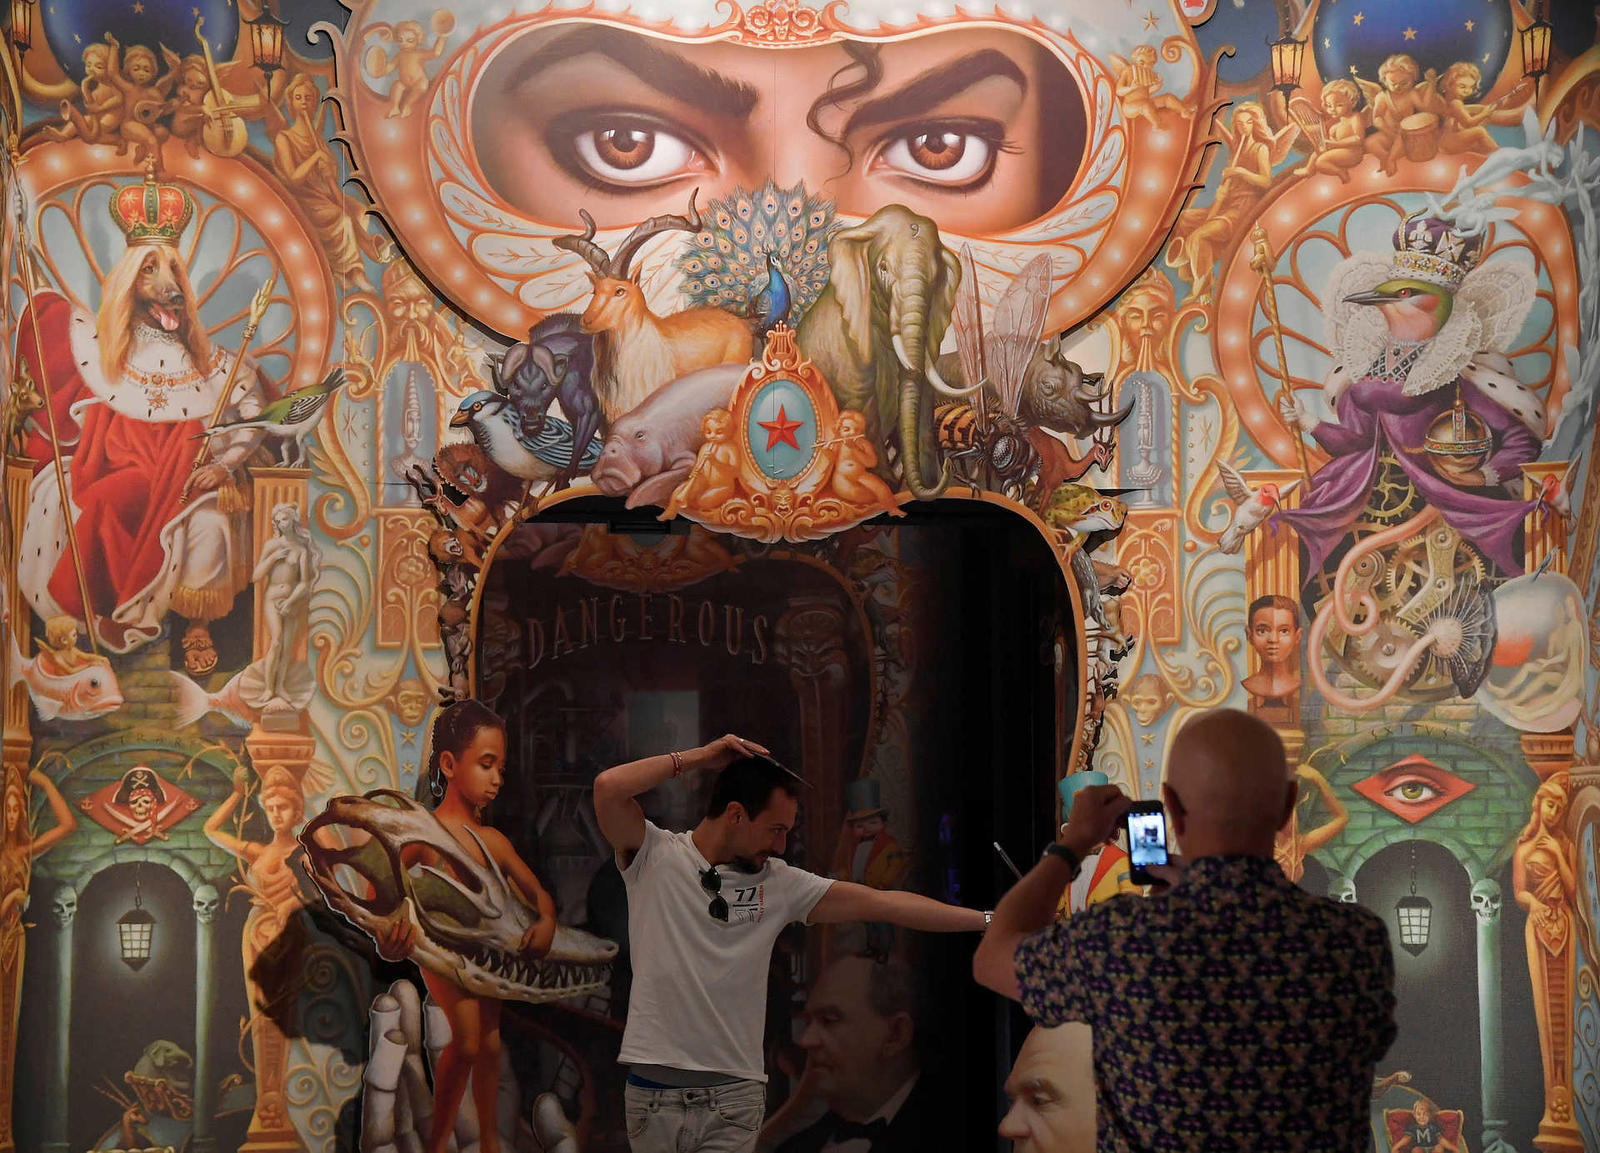 Visitors take photos beside ‘Detail of the King of Pop’ by Mark Ryden which forms part of the exhibition ‘Michael Jackson: On The Wall’ at the National Portrait Gallery in London, Britain